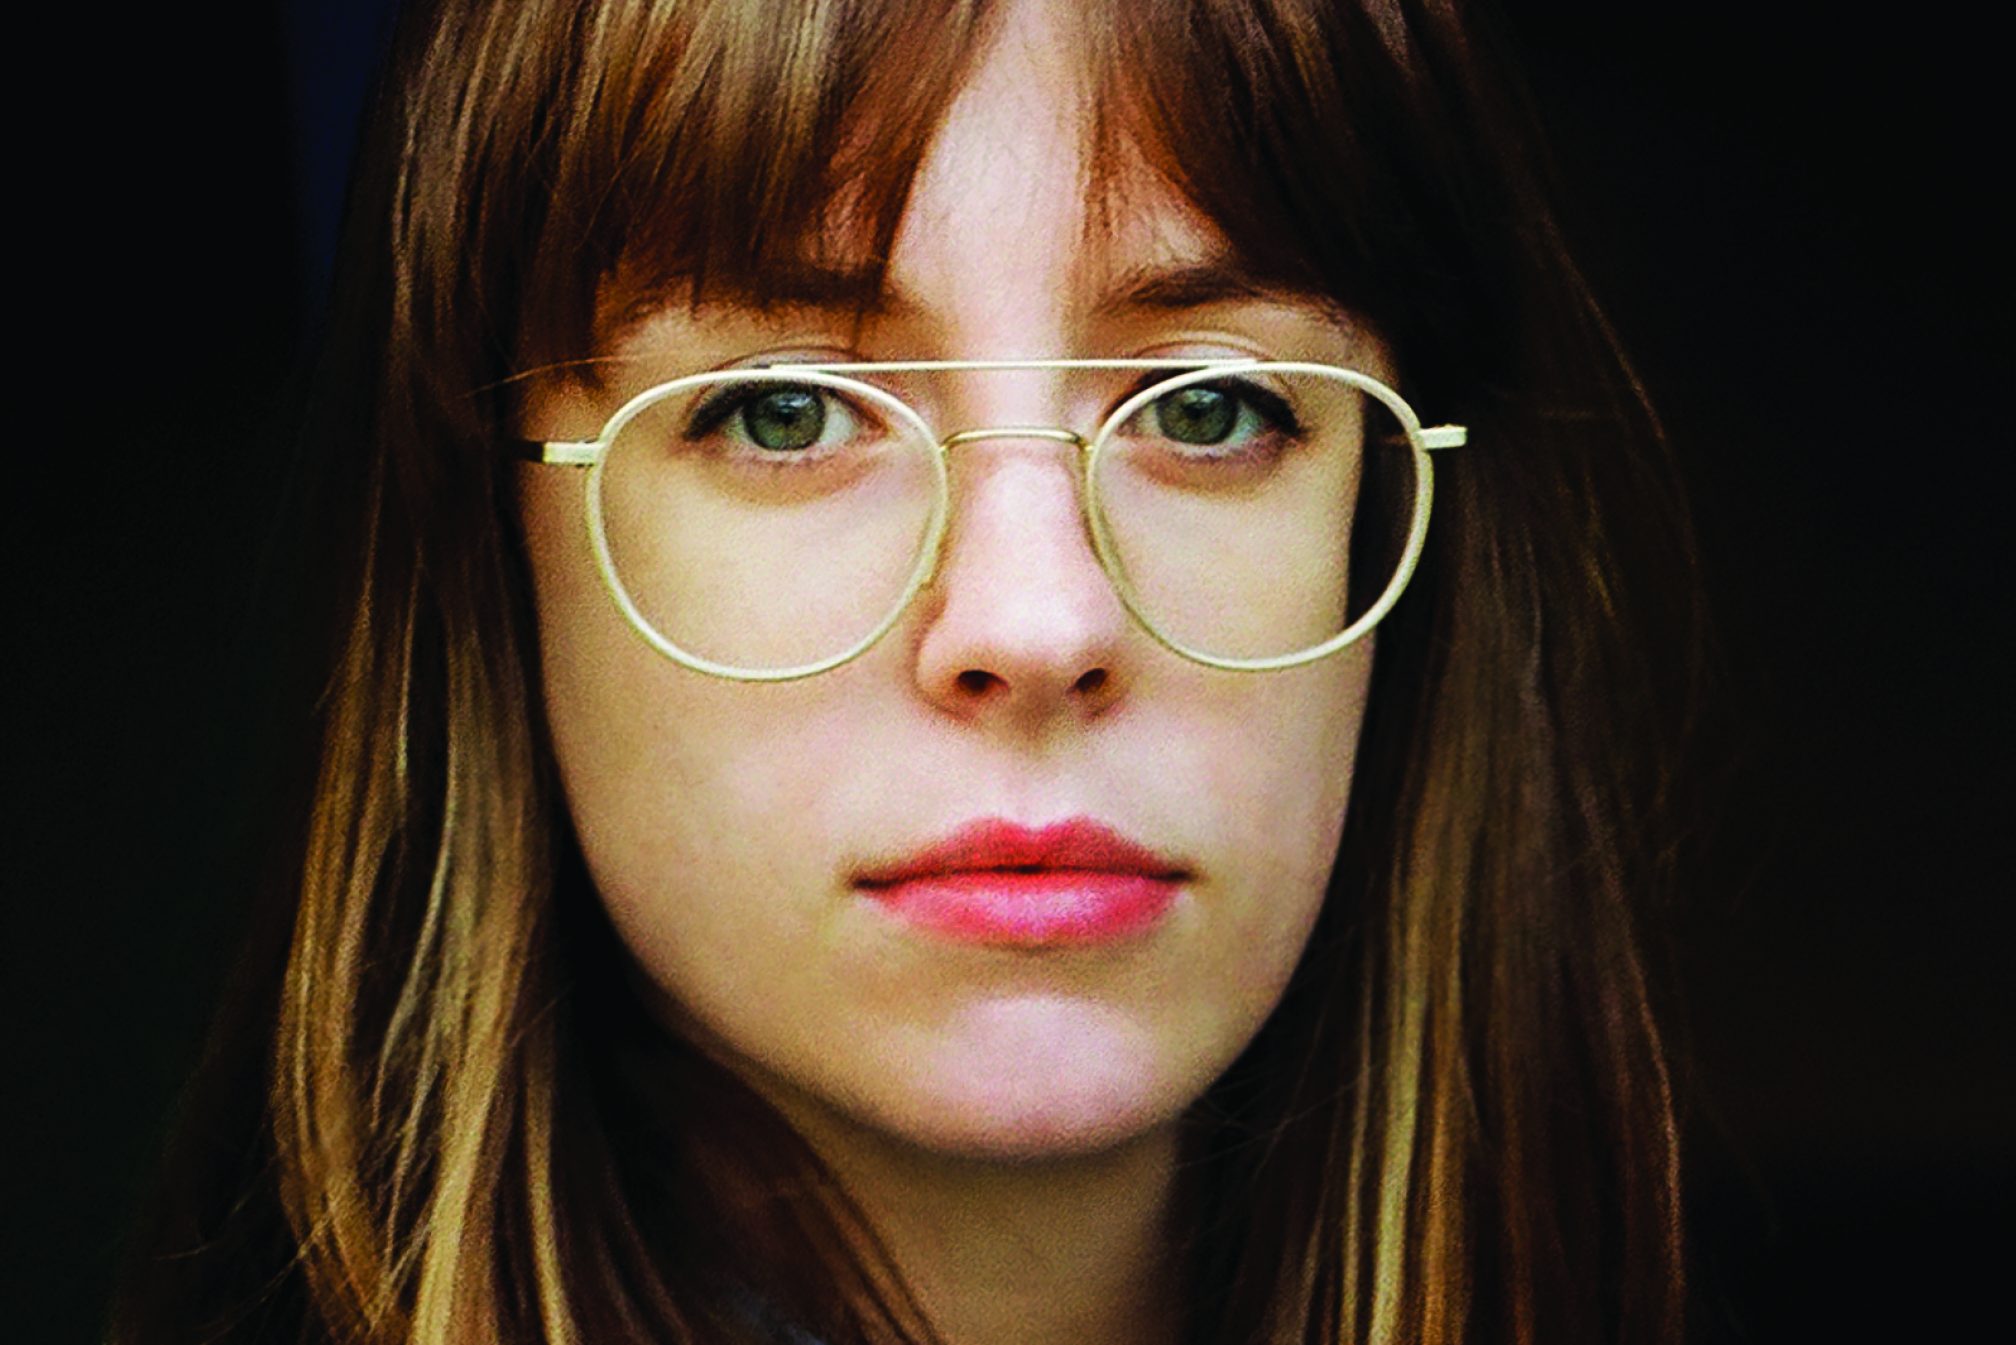 Astonishing releases and stunning DJ sets have sent Avalon Emerson on a remarkable ascent